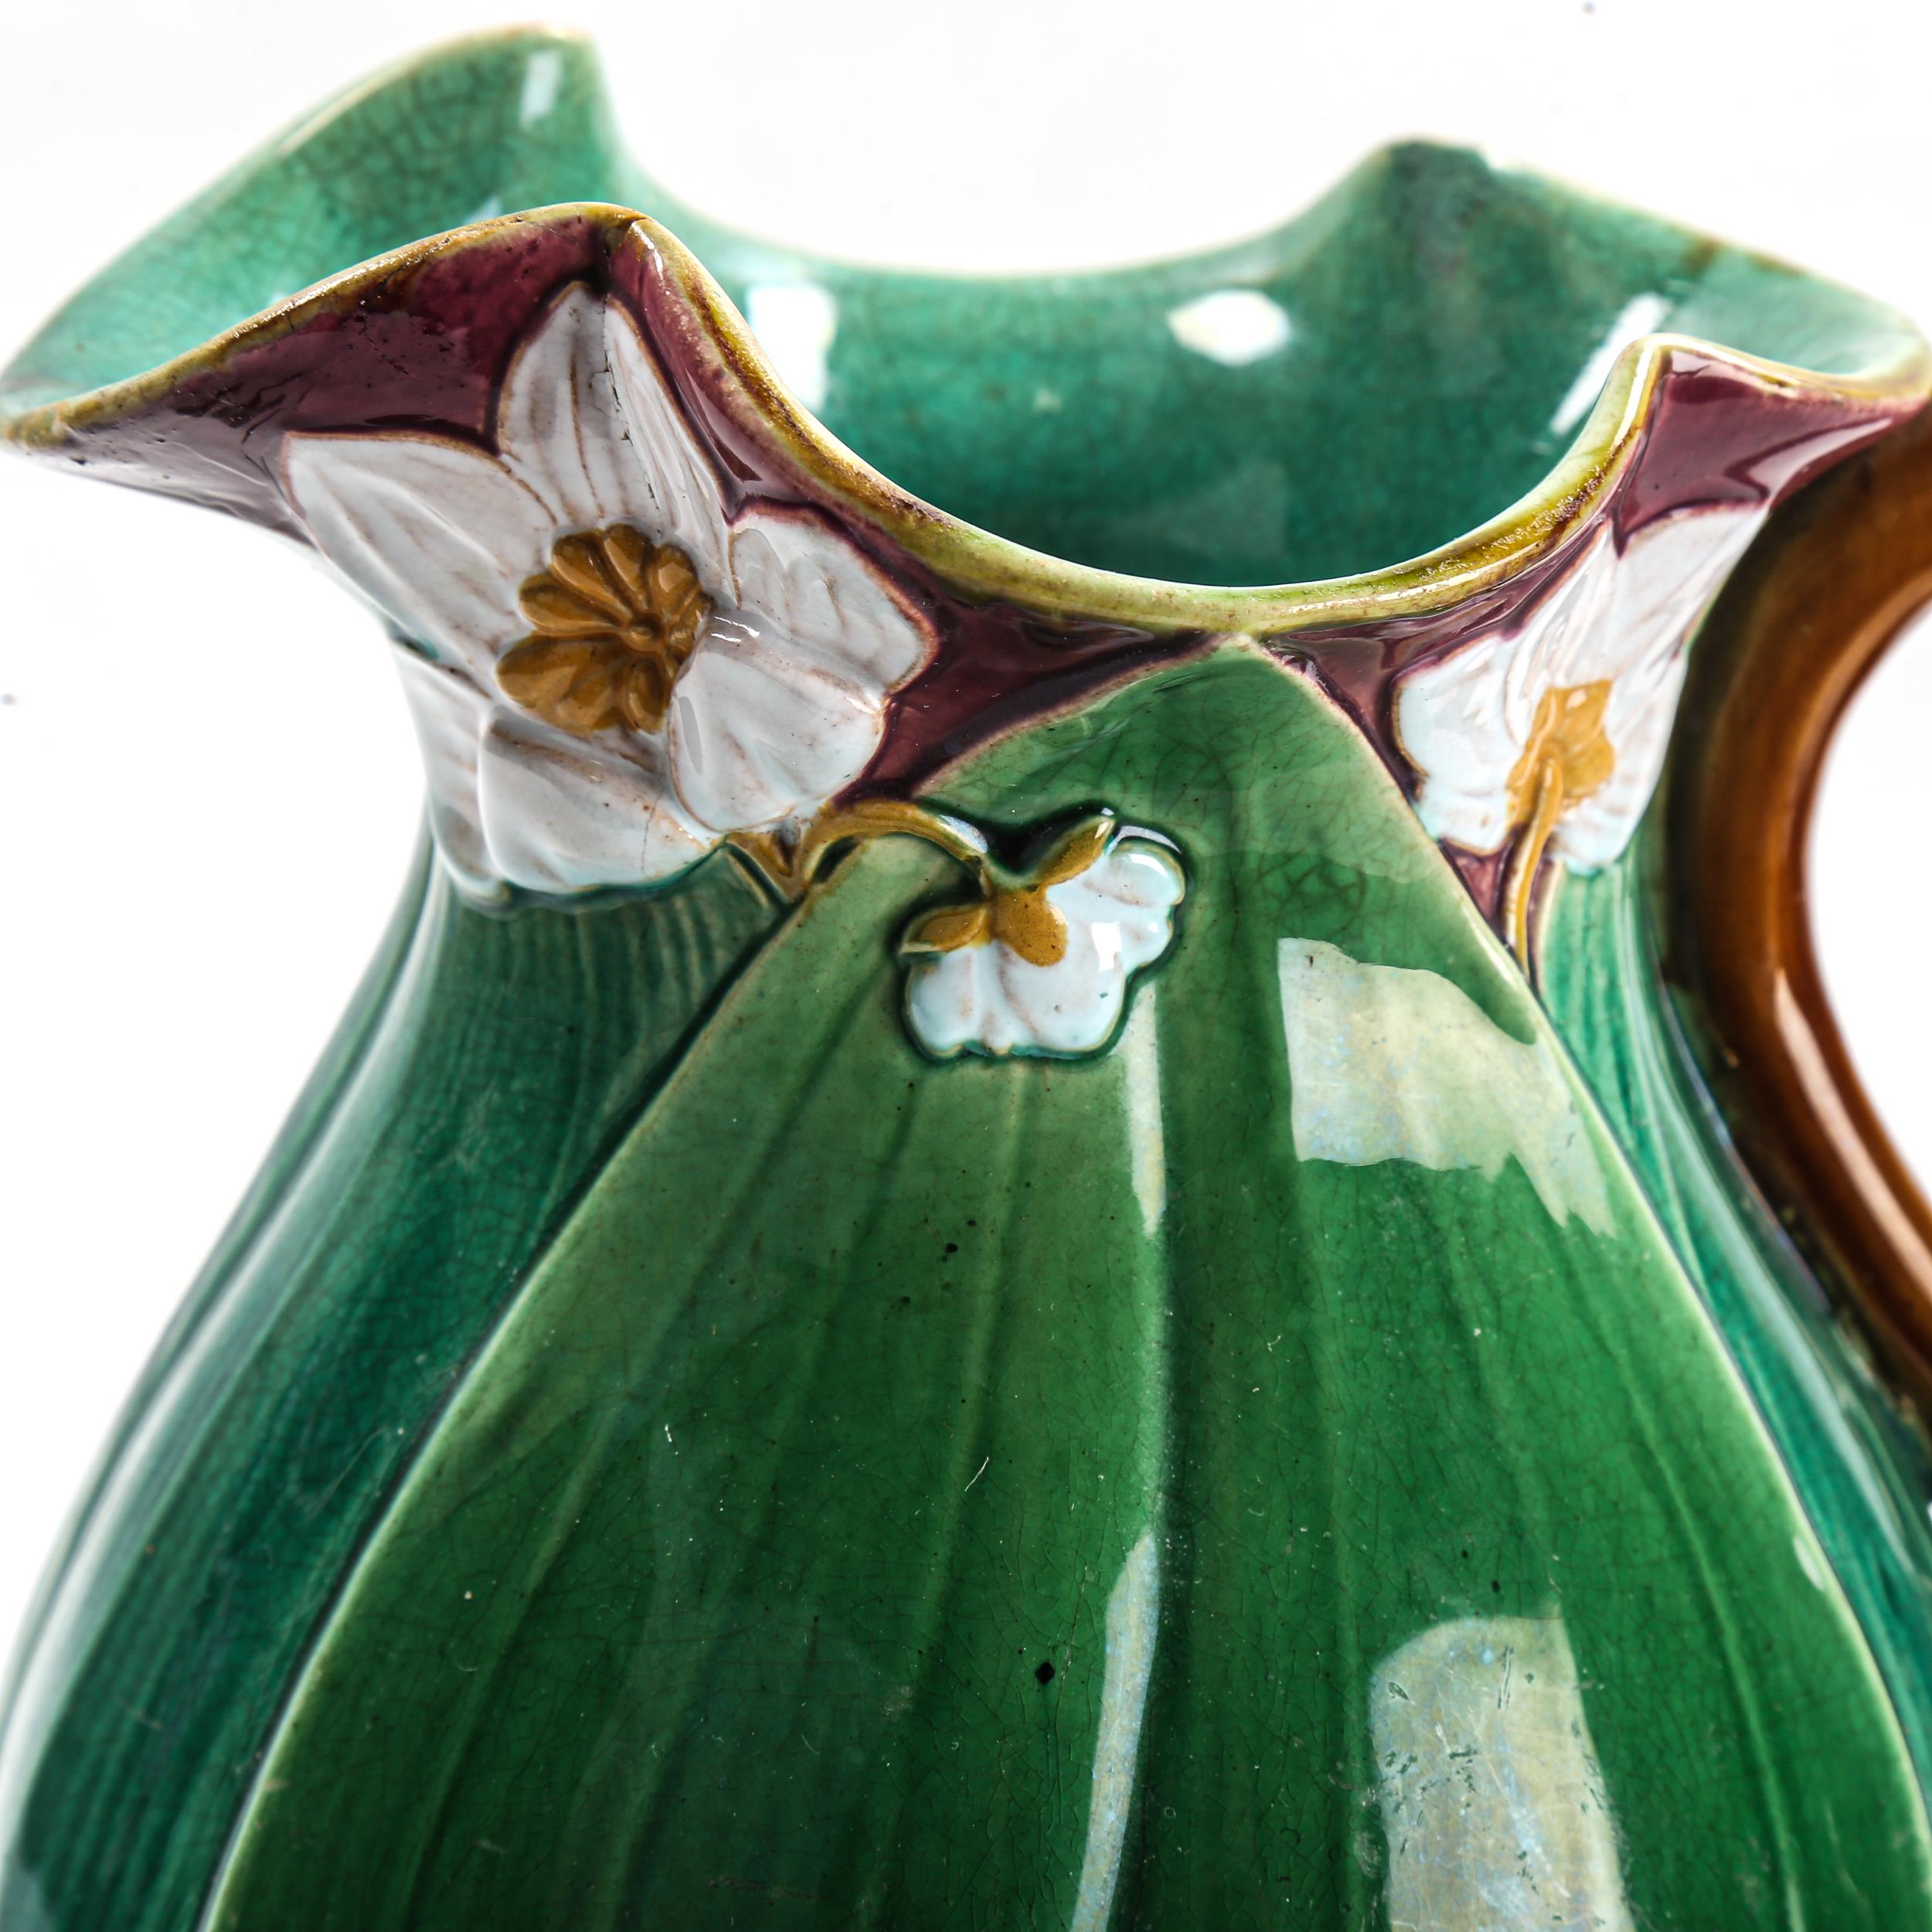 Minton Majolica pottery jug, lily flower and leaf moulded body, serial no. 1228, height 22cm - Image 2 of 3